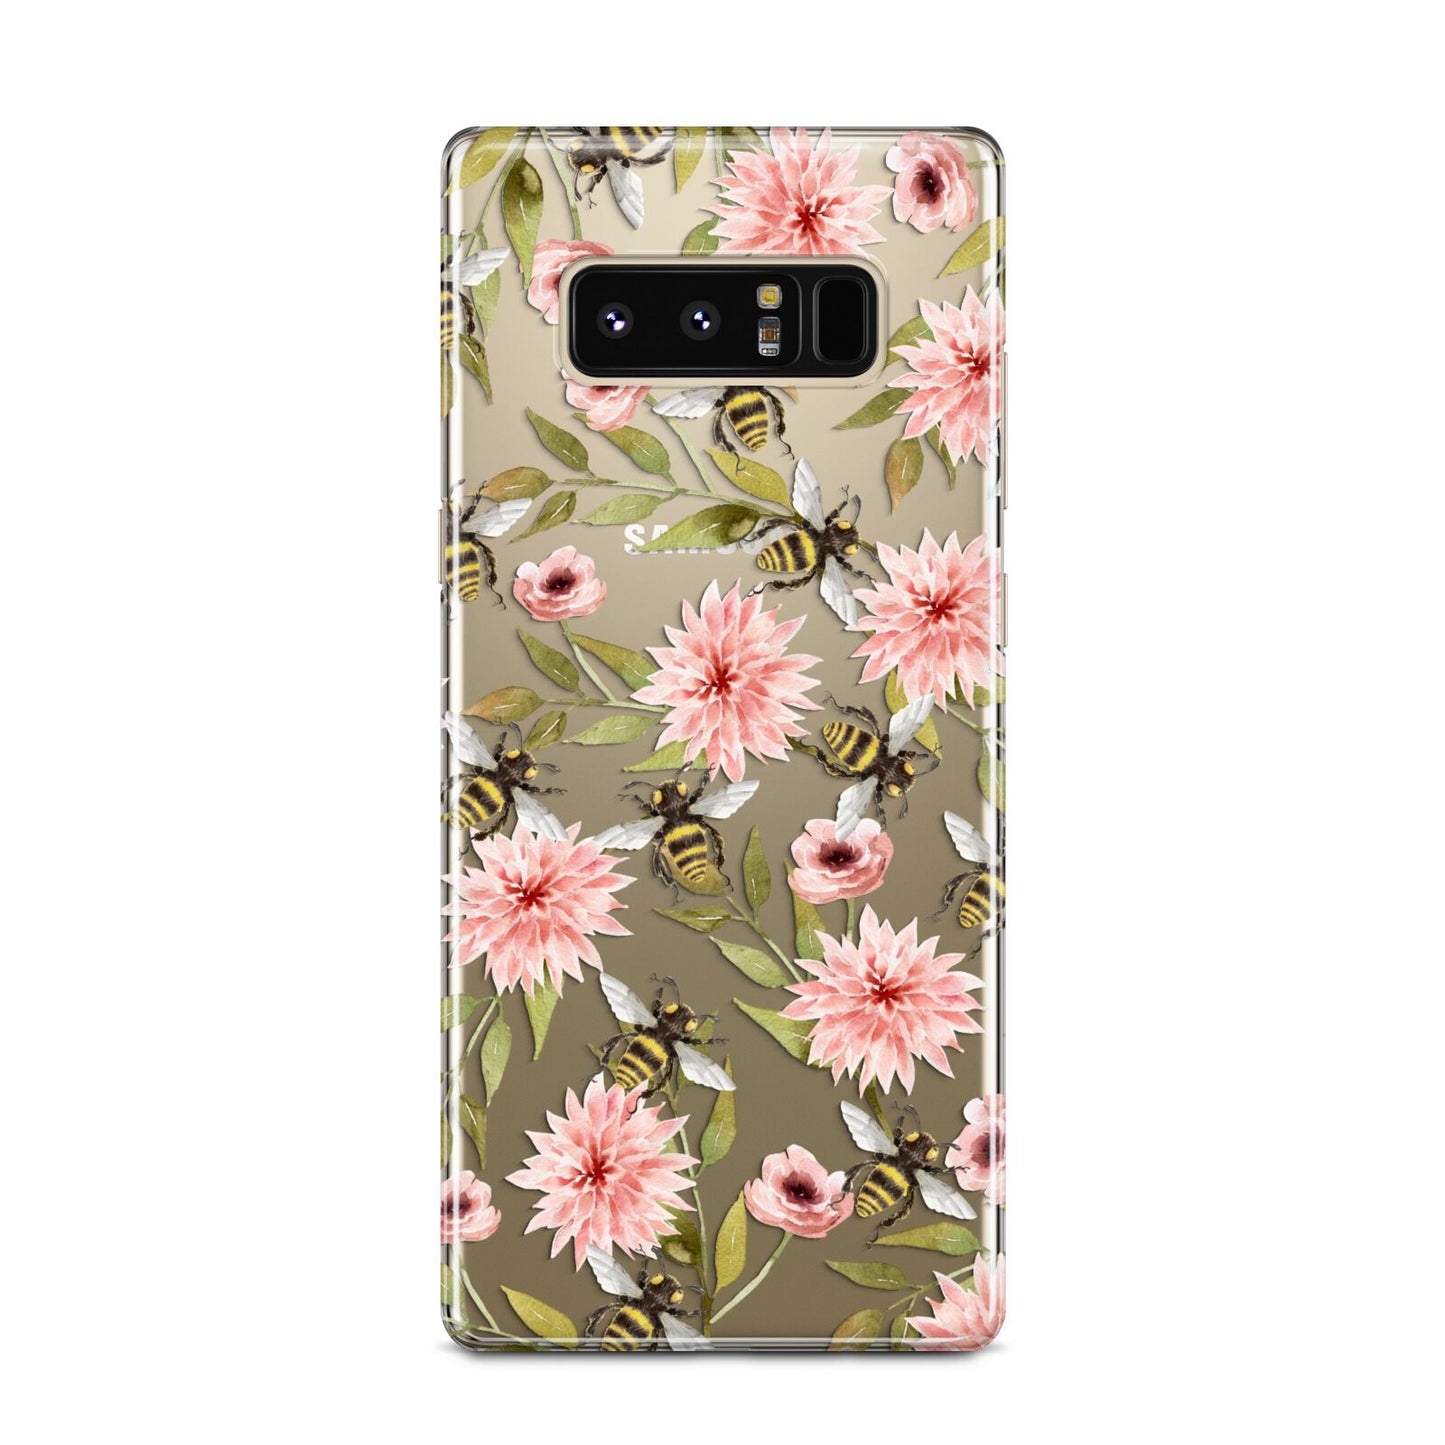 Pink Flowers and Bees Samsung Galaxy Note 8 Case